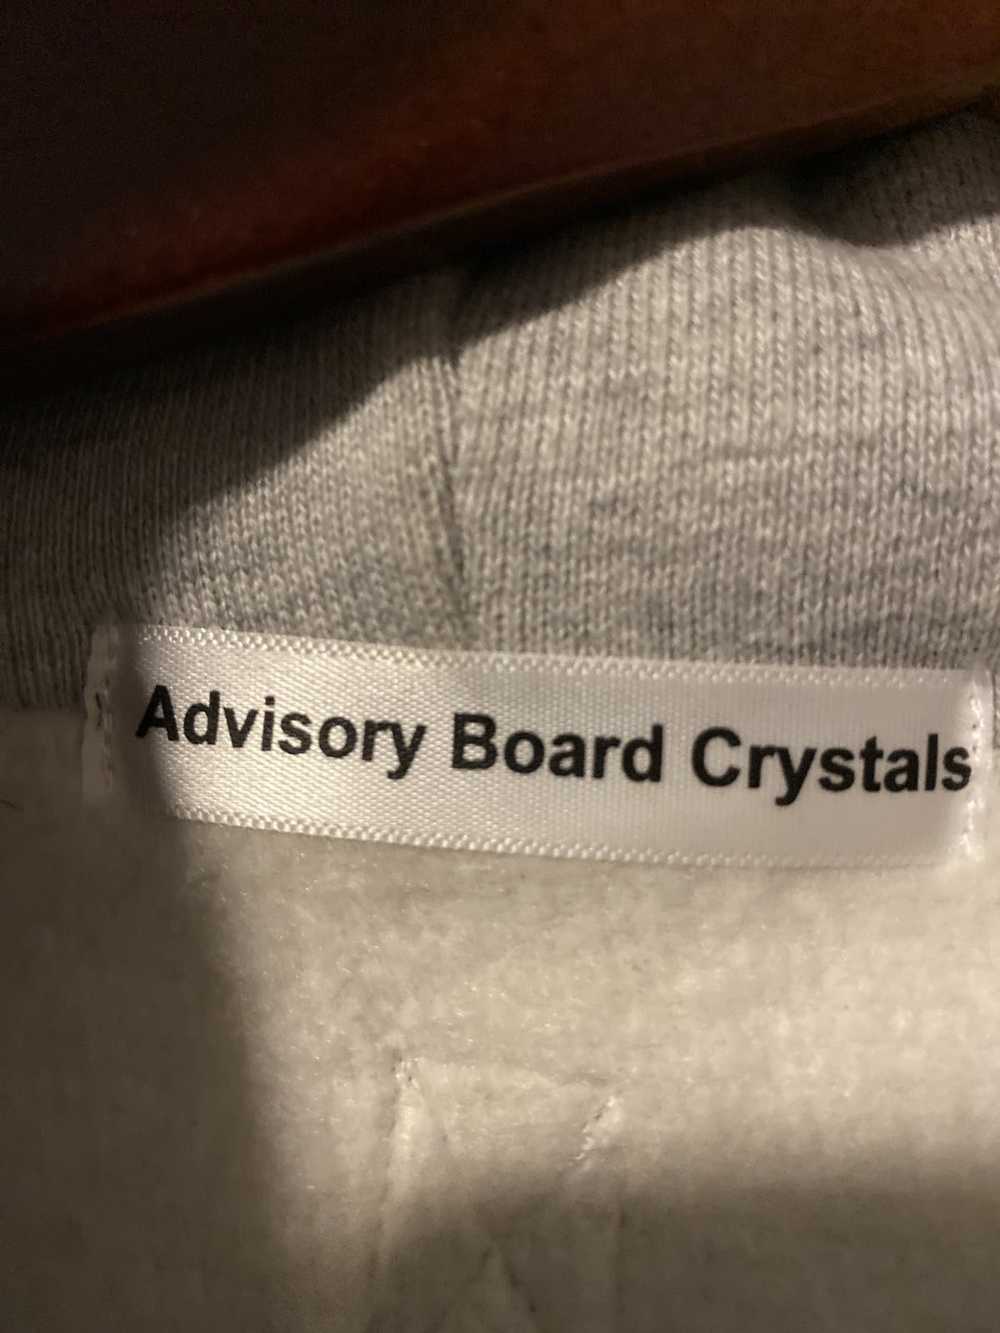 Advisory Board Crystals Makes Transcendental Clothing for the